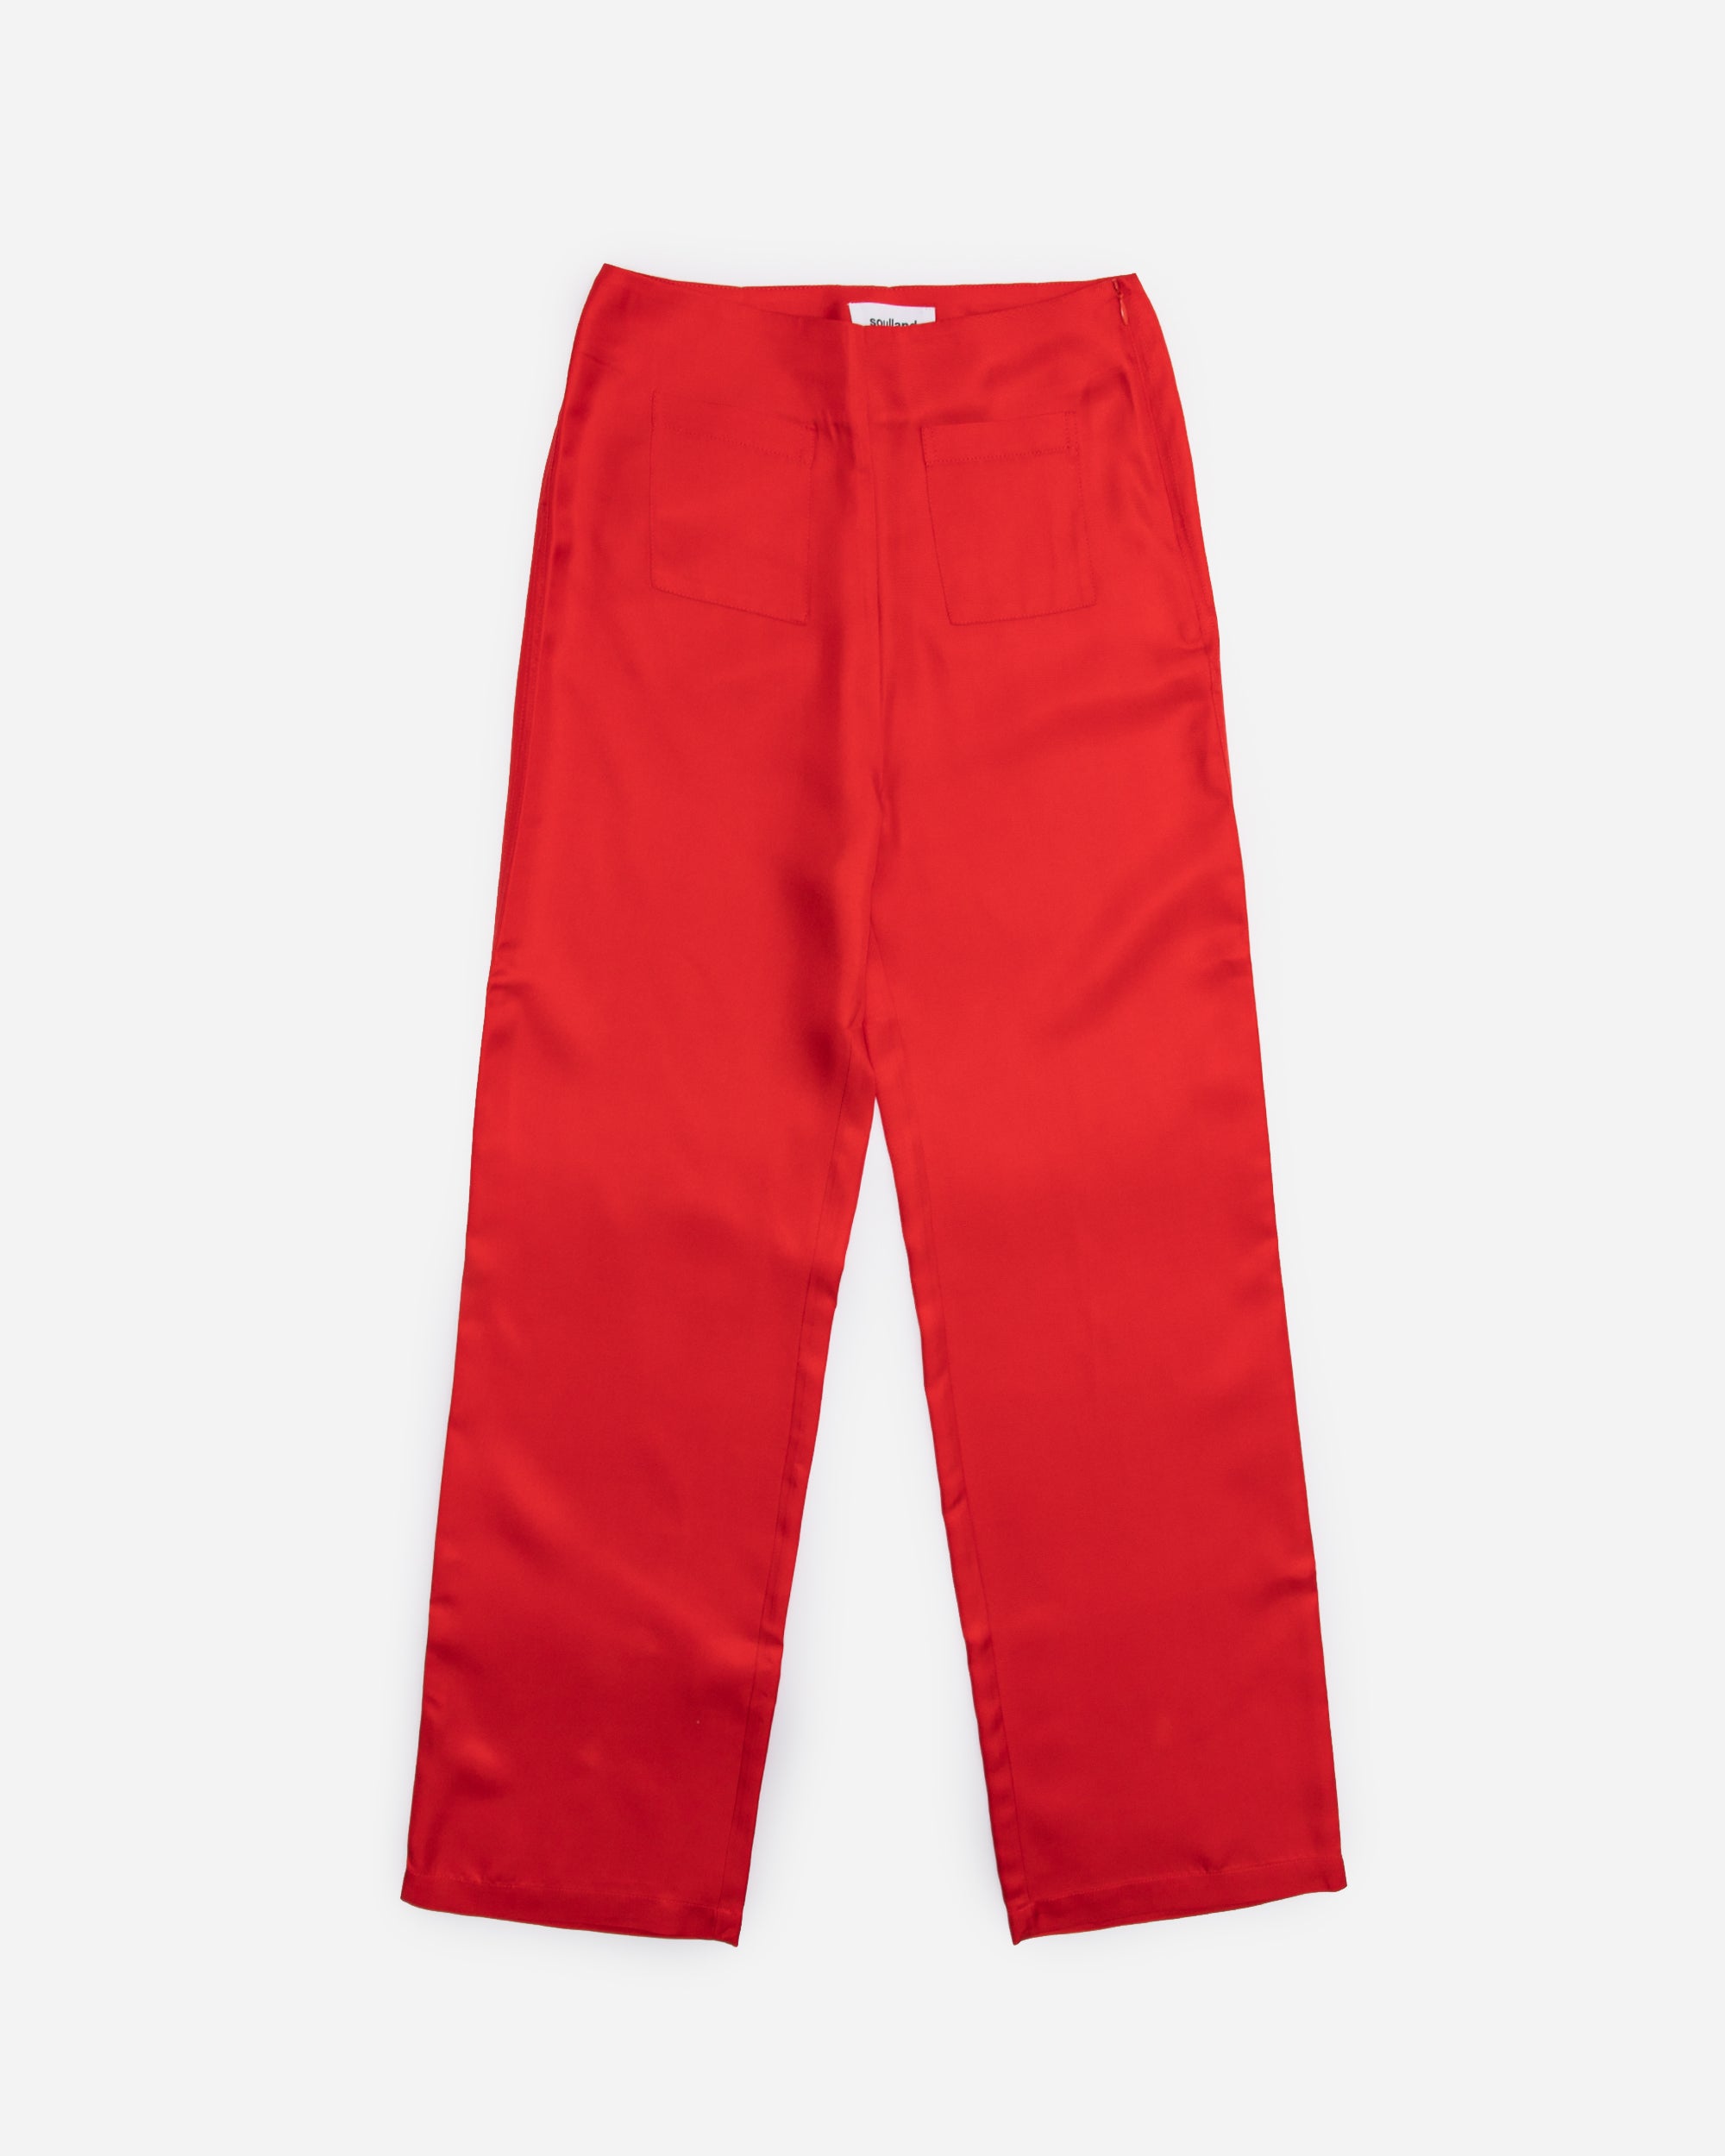 SOULLAND Asta Pants Red 11005-1008-RED